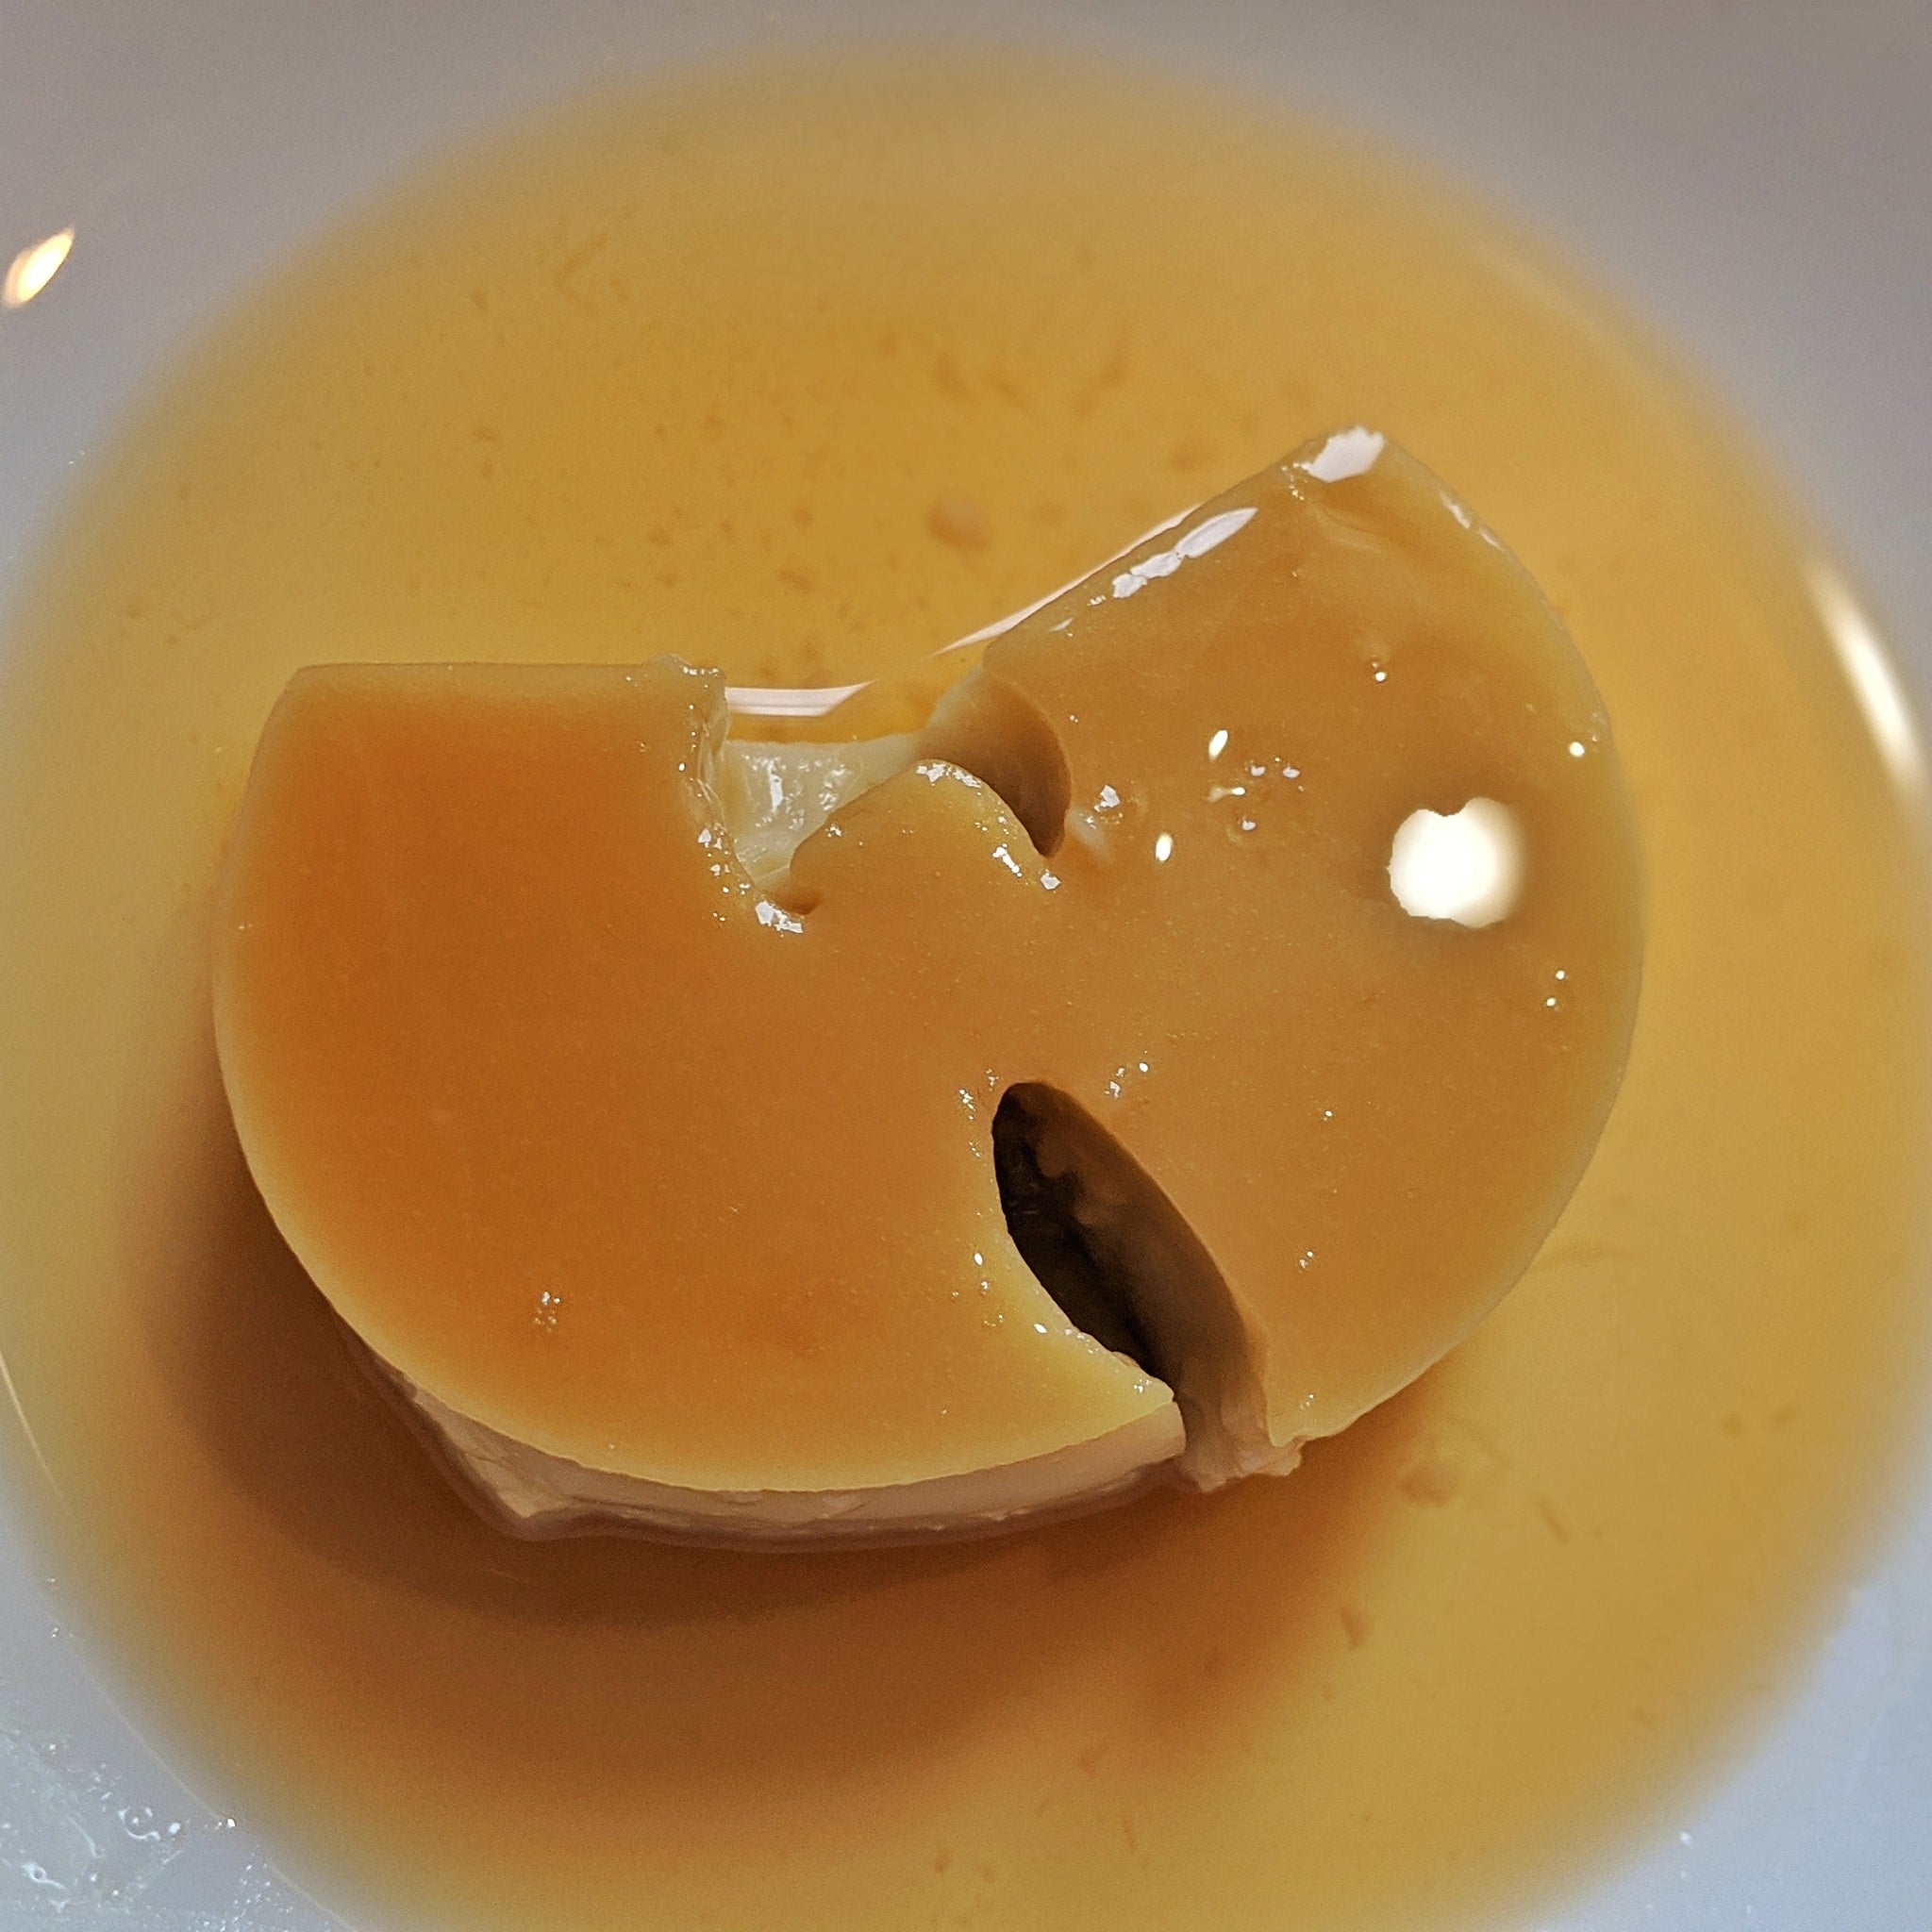 Wu Tang Flan Or C R E A M Caramel I Made And Delivered These All Weekend For Charity Dining And Cooking